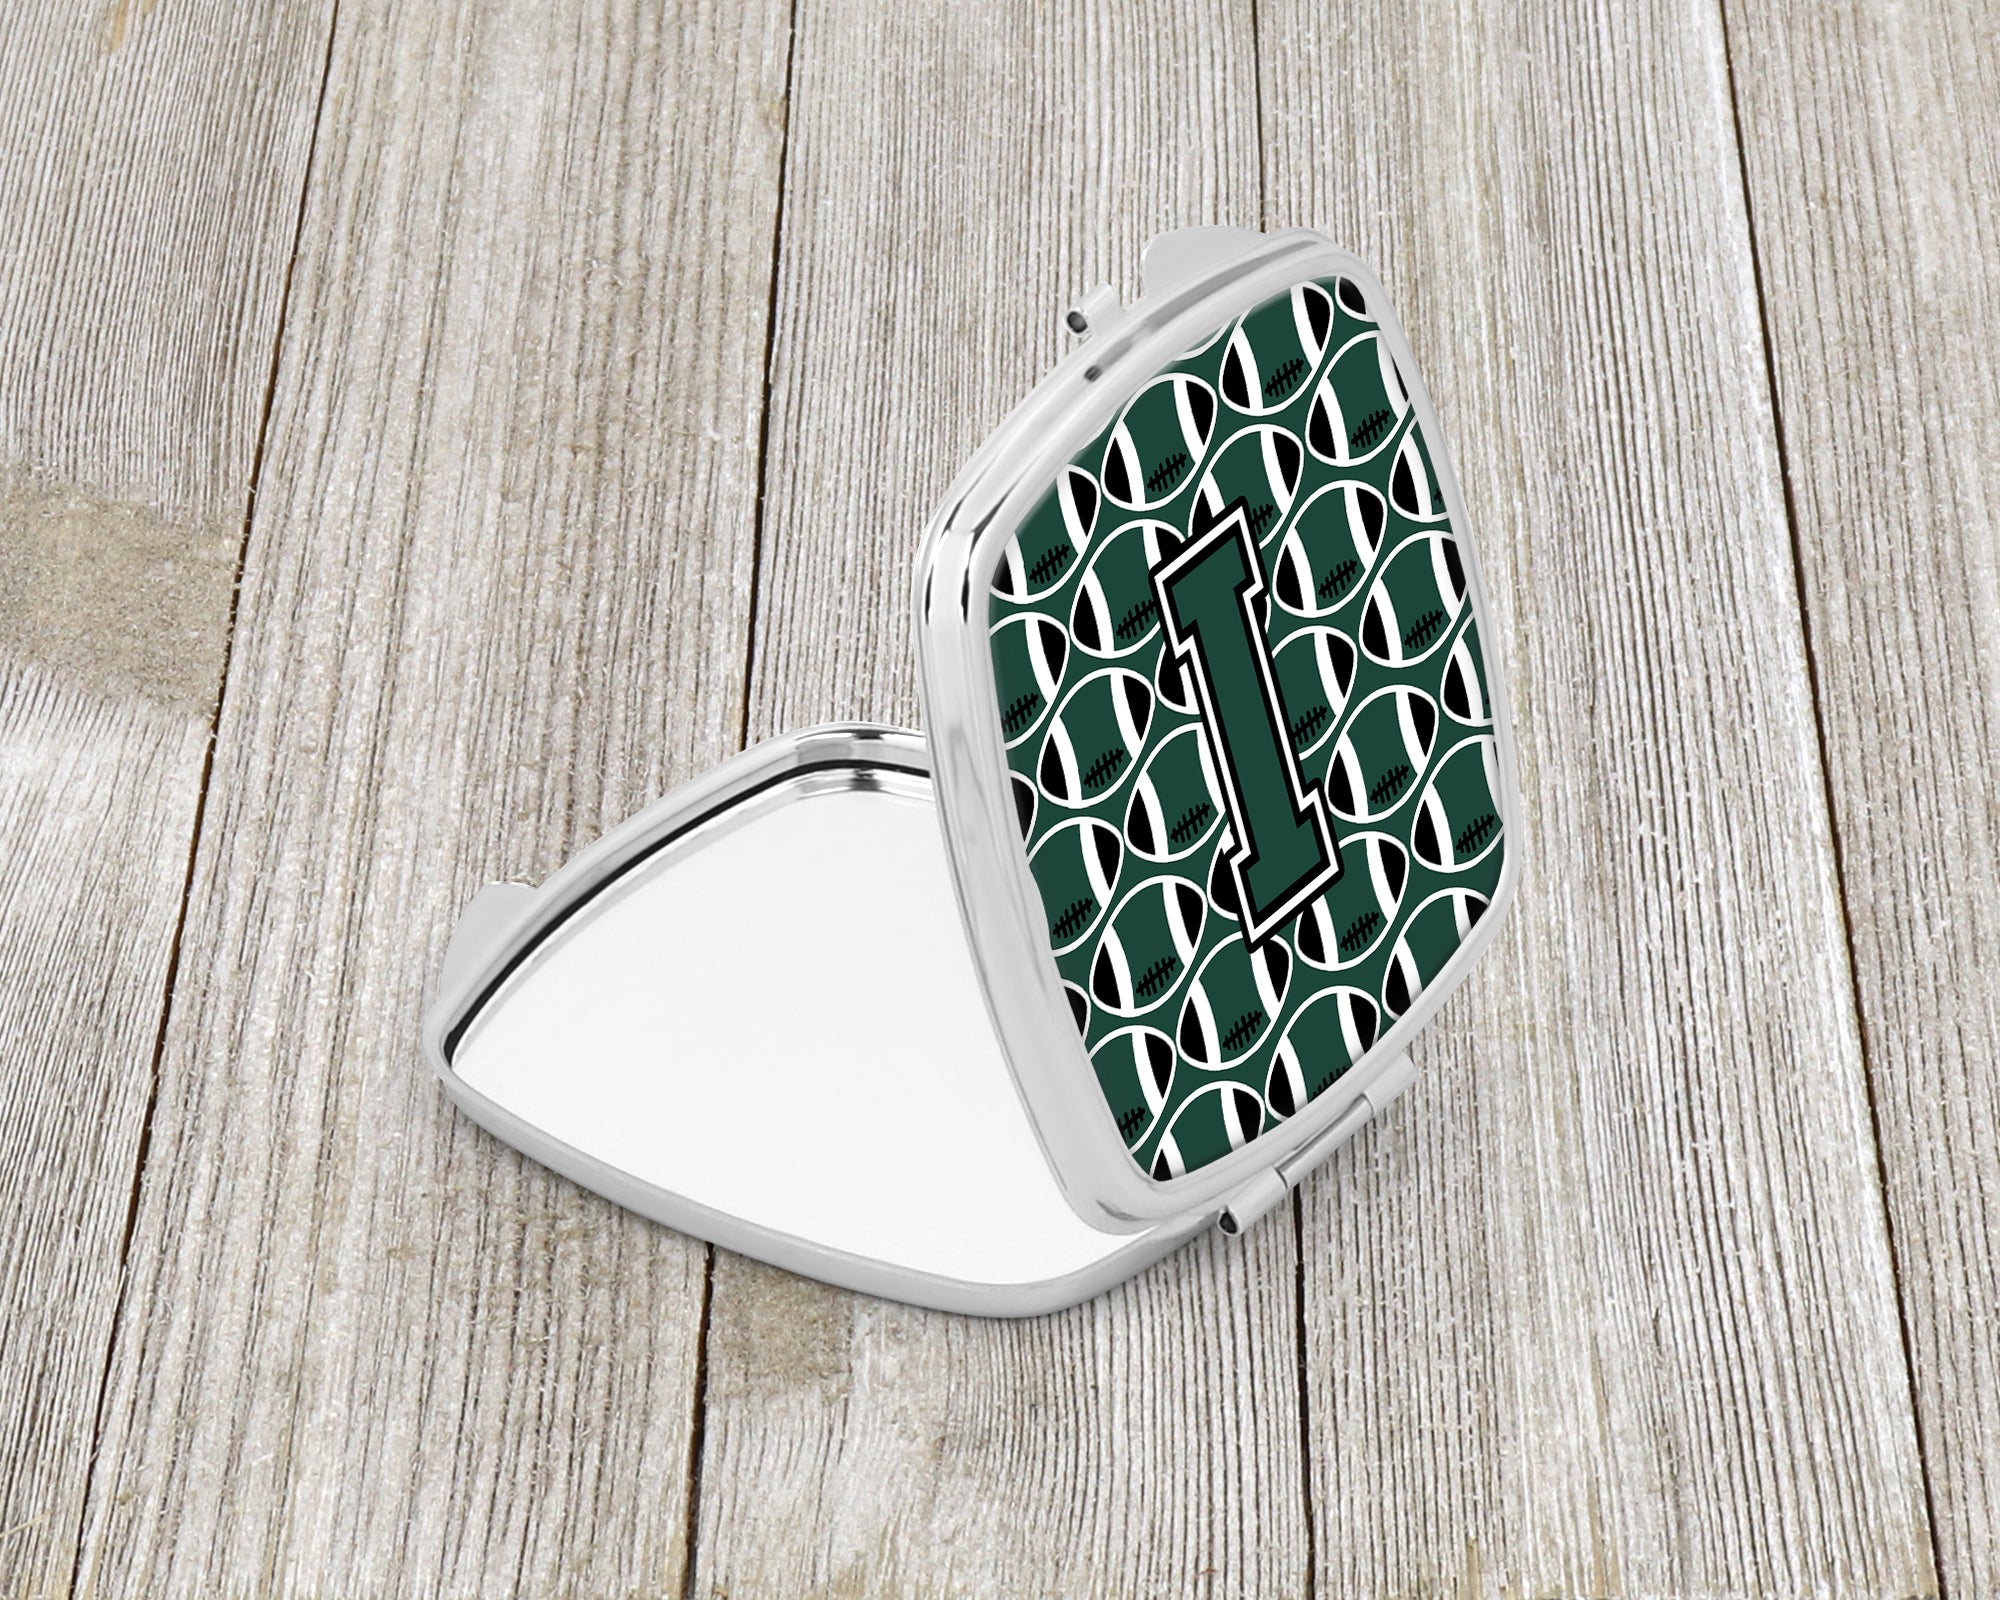 Letter I Football Green and White Compact Mirror CJ1071-ISCM